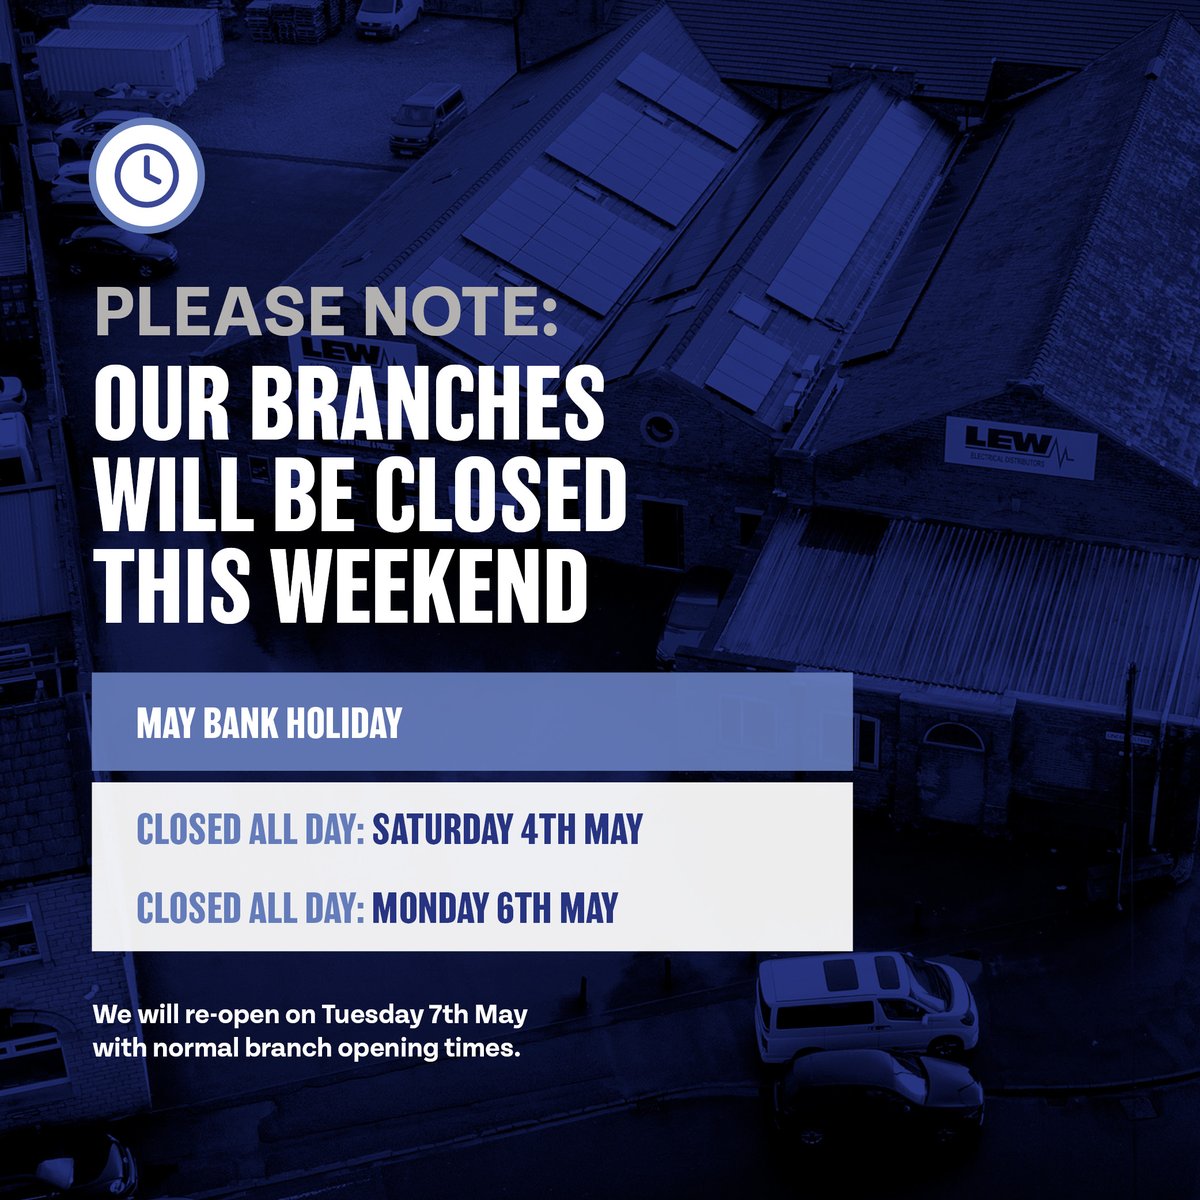 Our branches will be closed on Saturday 4th May & Monday 6th May for the Bank Holiday!